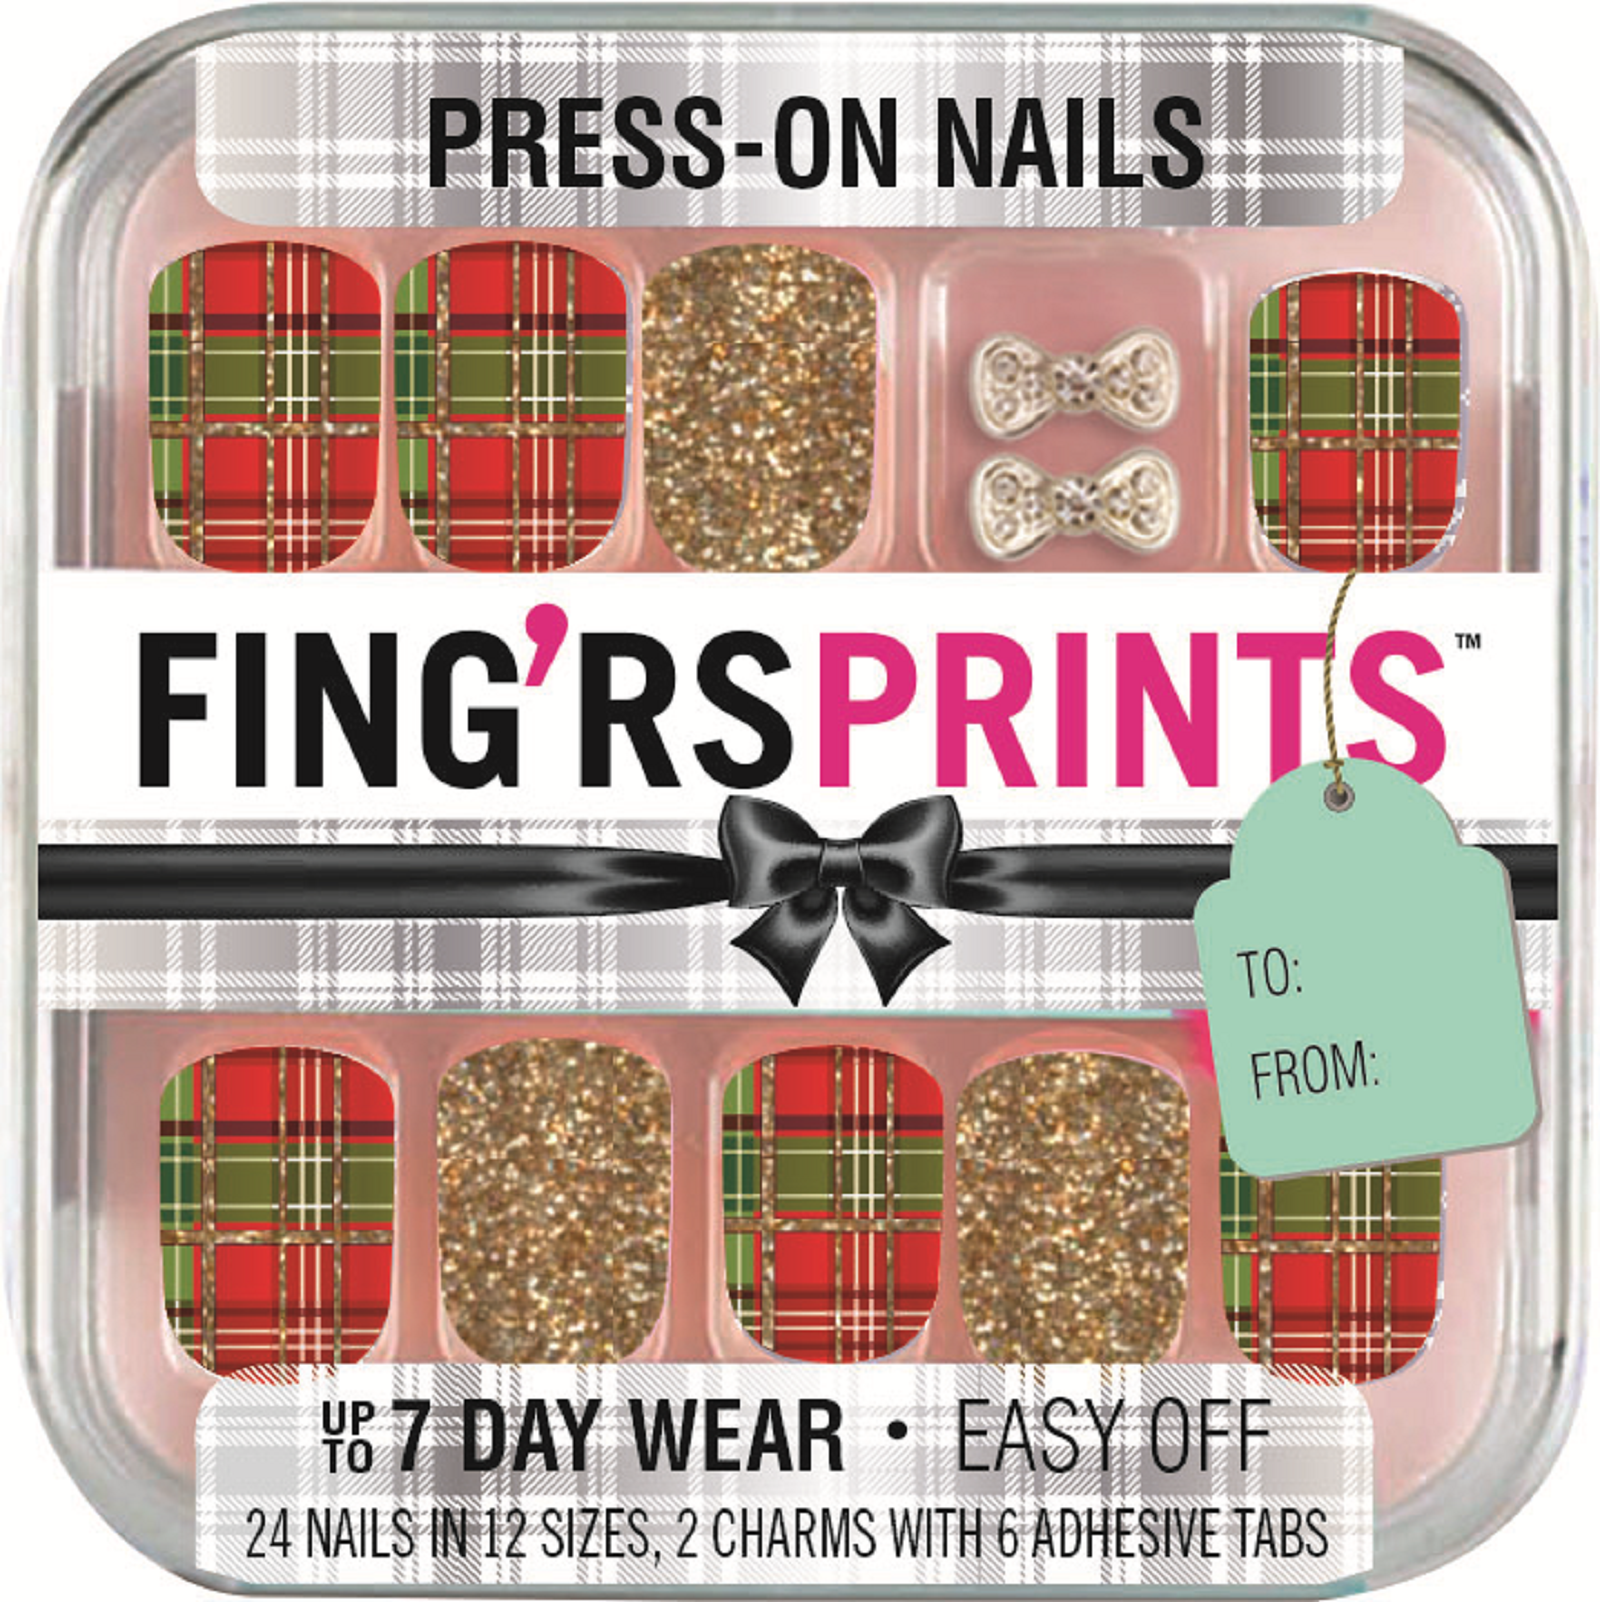 Fingrs Prints Simply Chic Press-On Nails